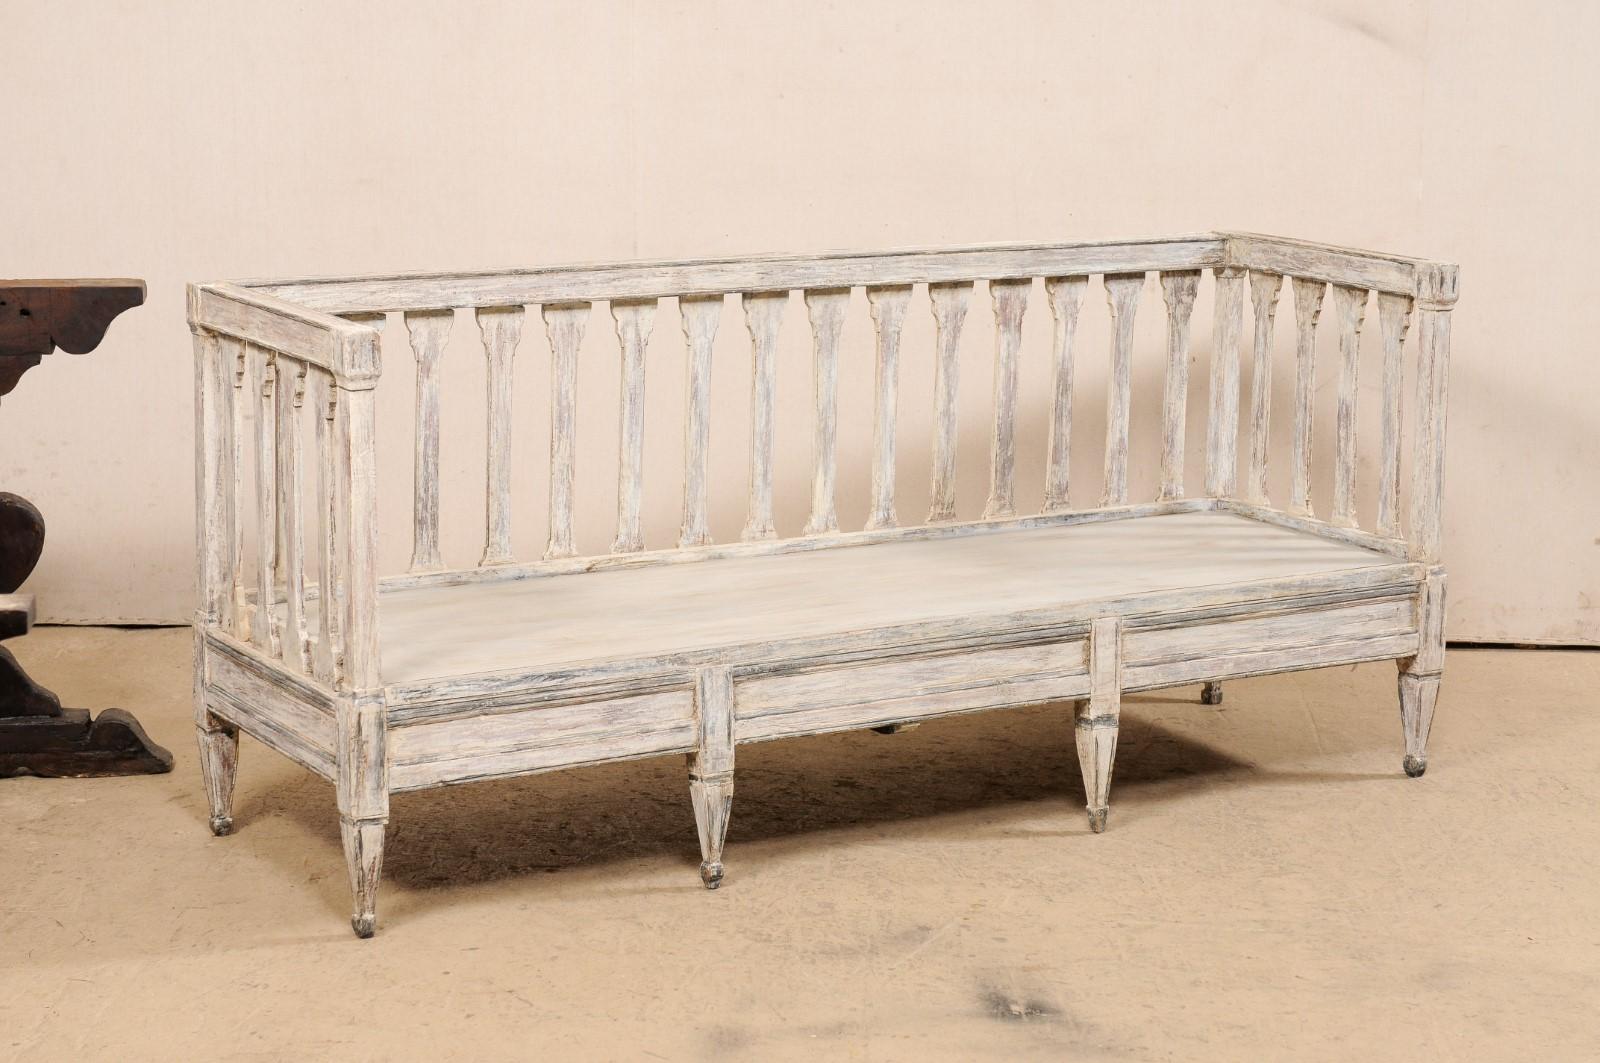 A Swedish late Gustavian Period carved and painted wood sofa bench from the early 19th century. This antique sofa bench from Sweden features a high back and arms comprised of a linear top rail with flattened, column-style carved slats set across the